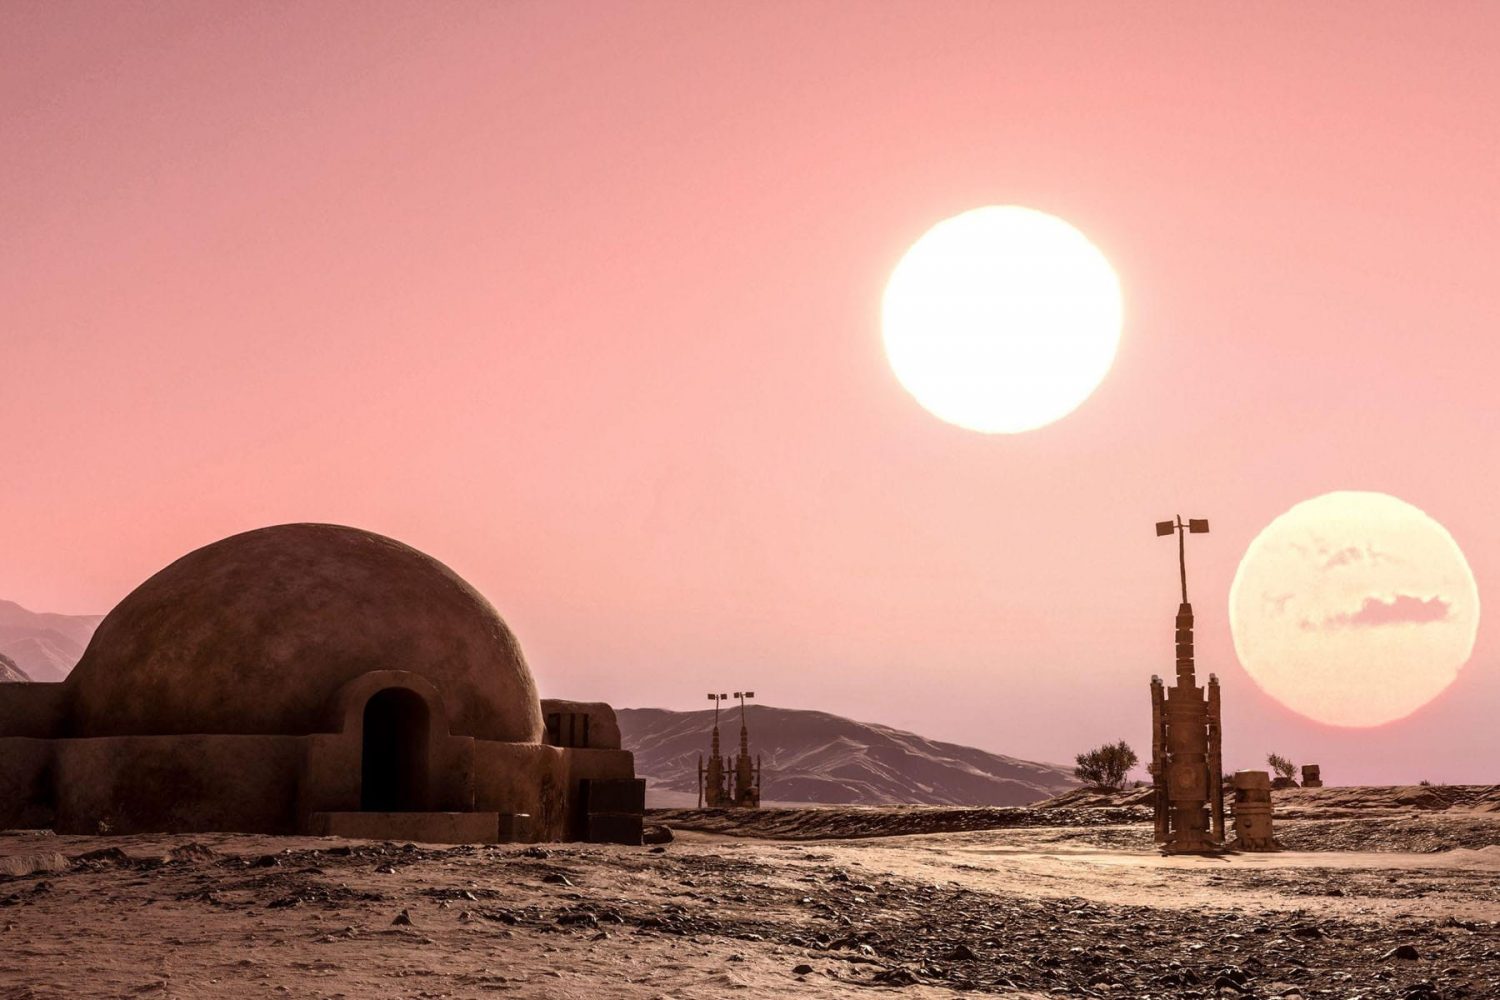 Star Wars and Tatooine Planet